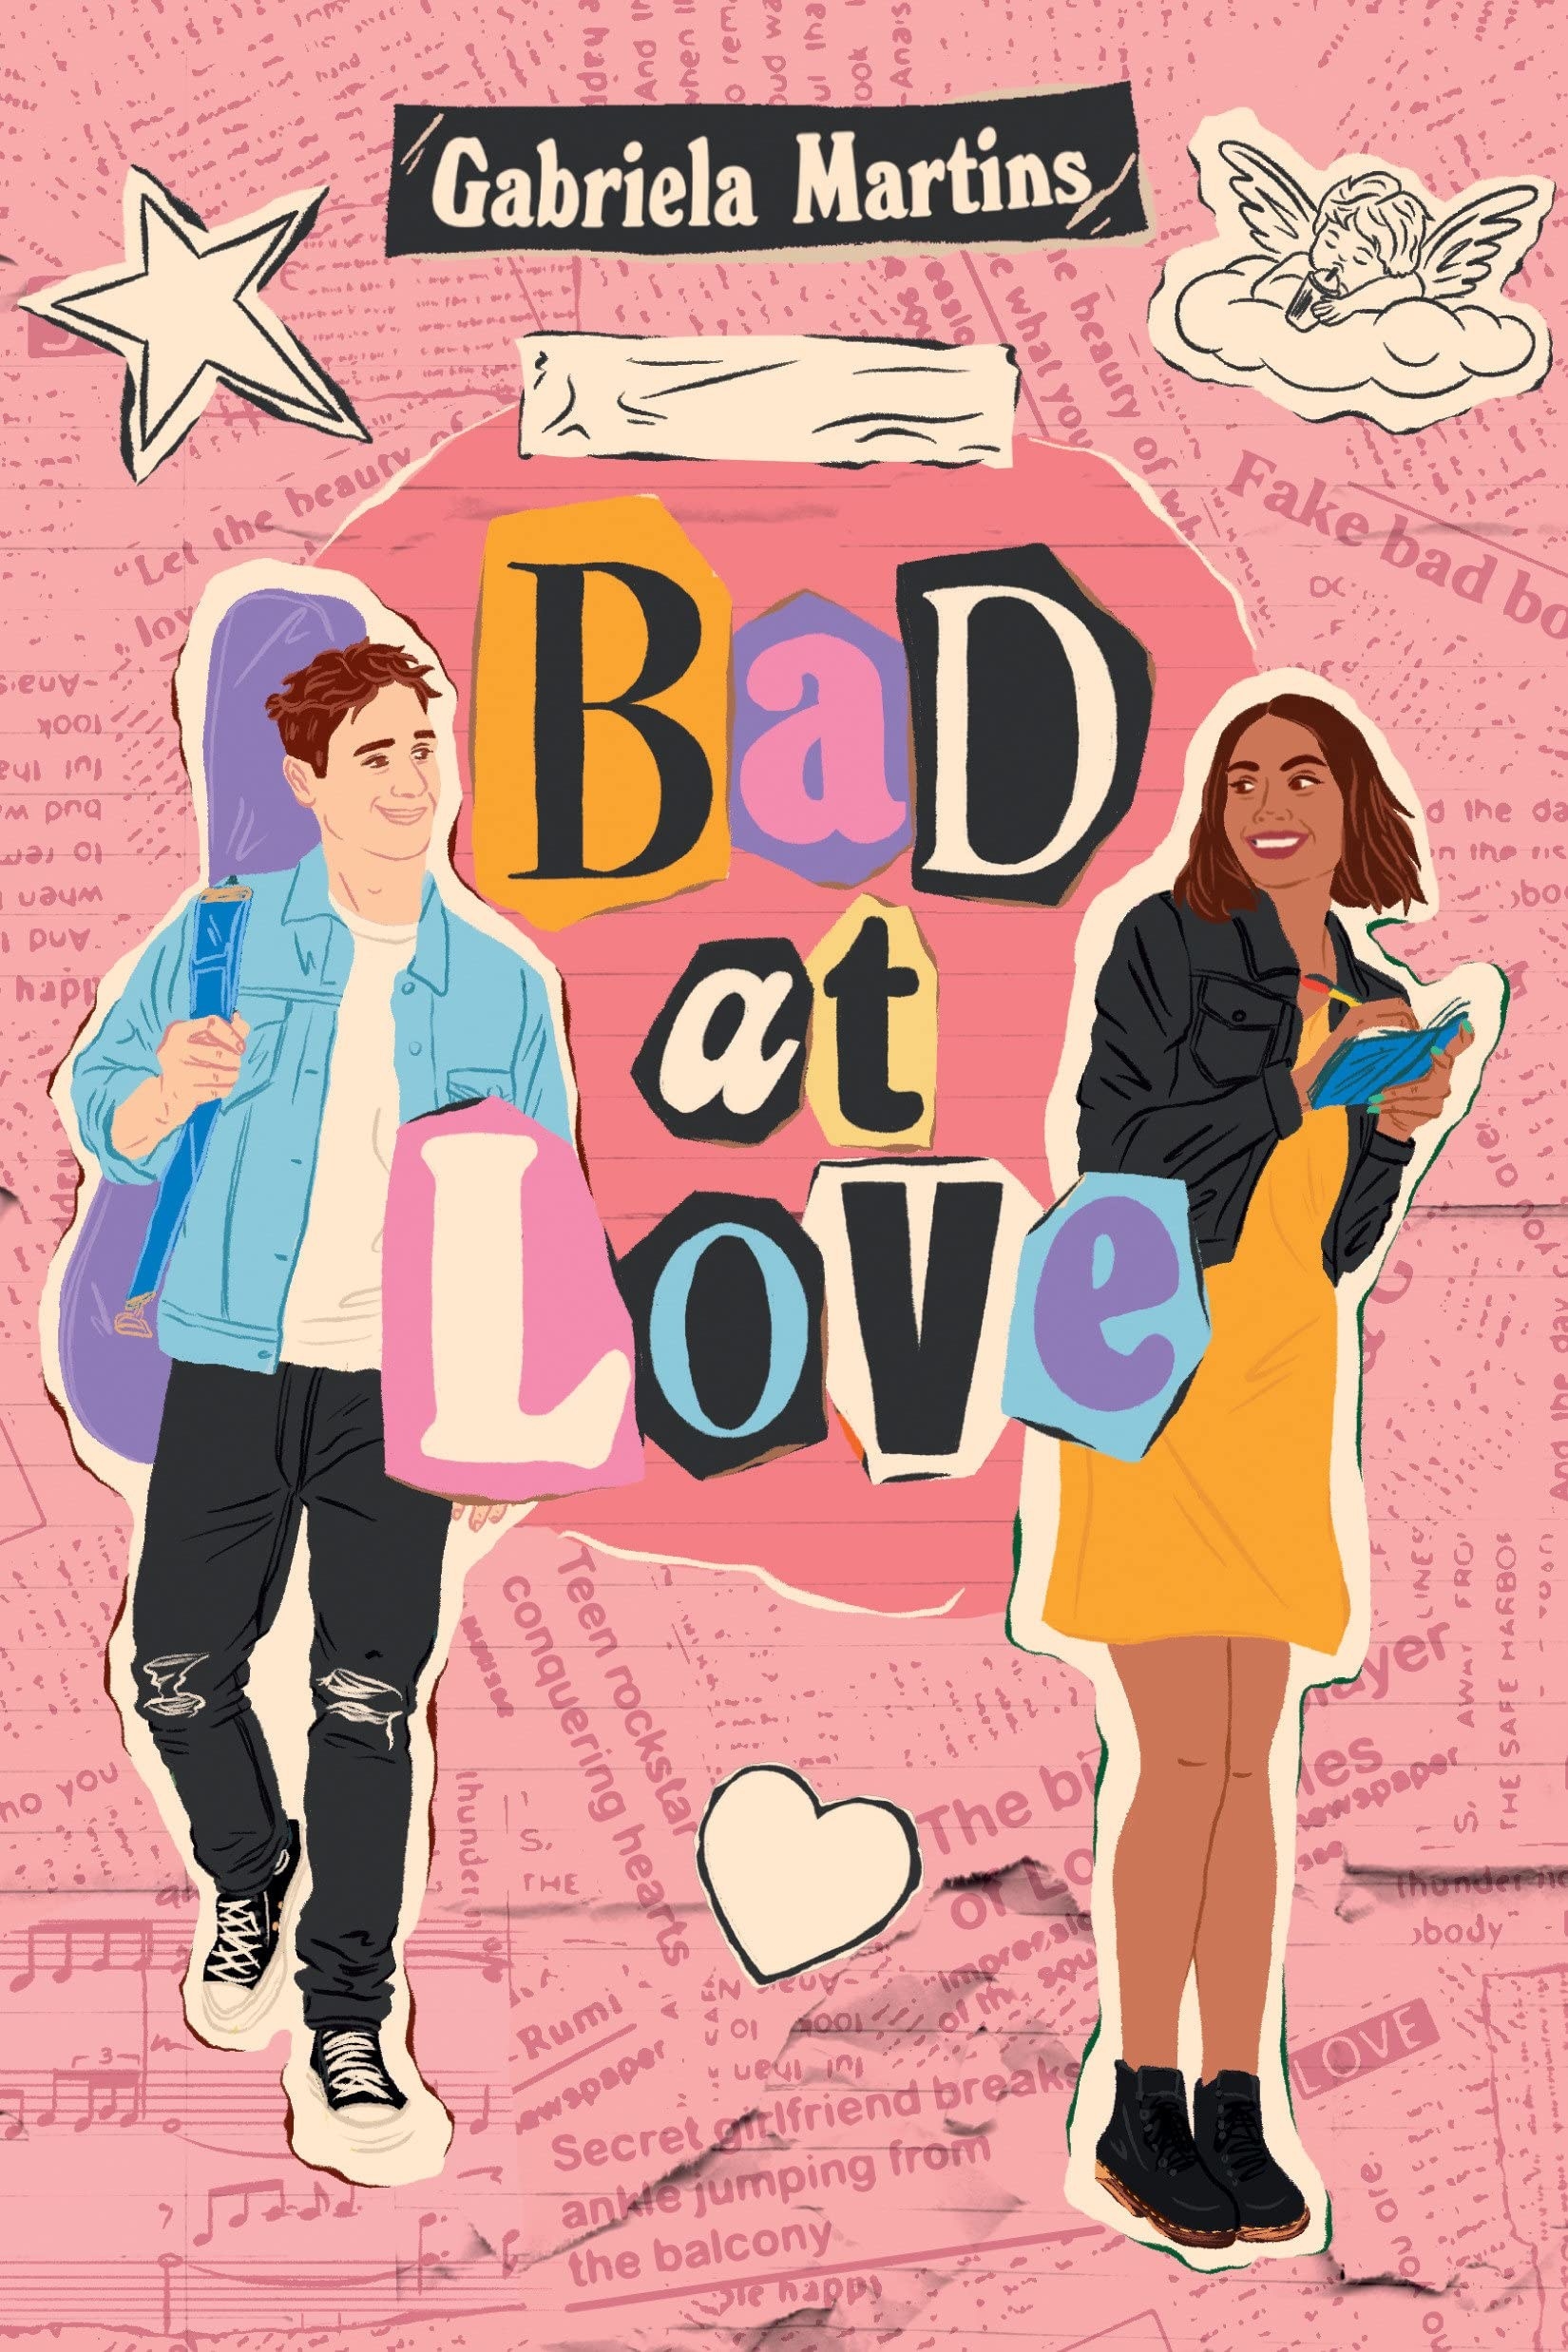 Bad At Love book cover. Book by Gabriela Martins